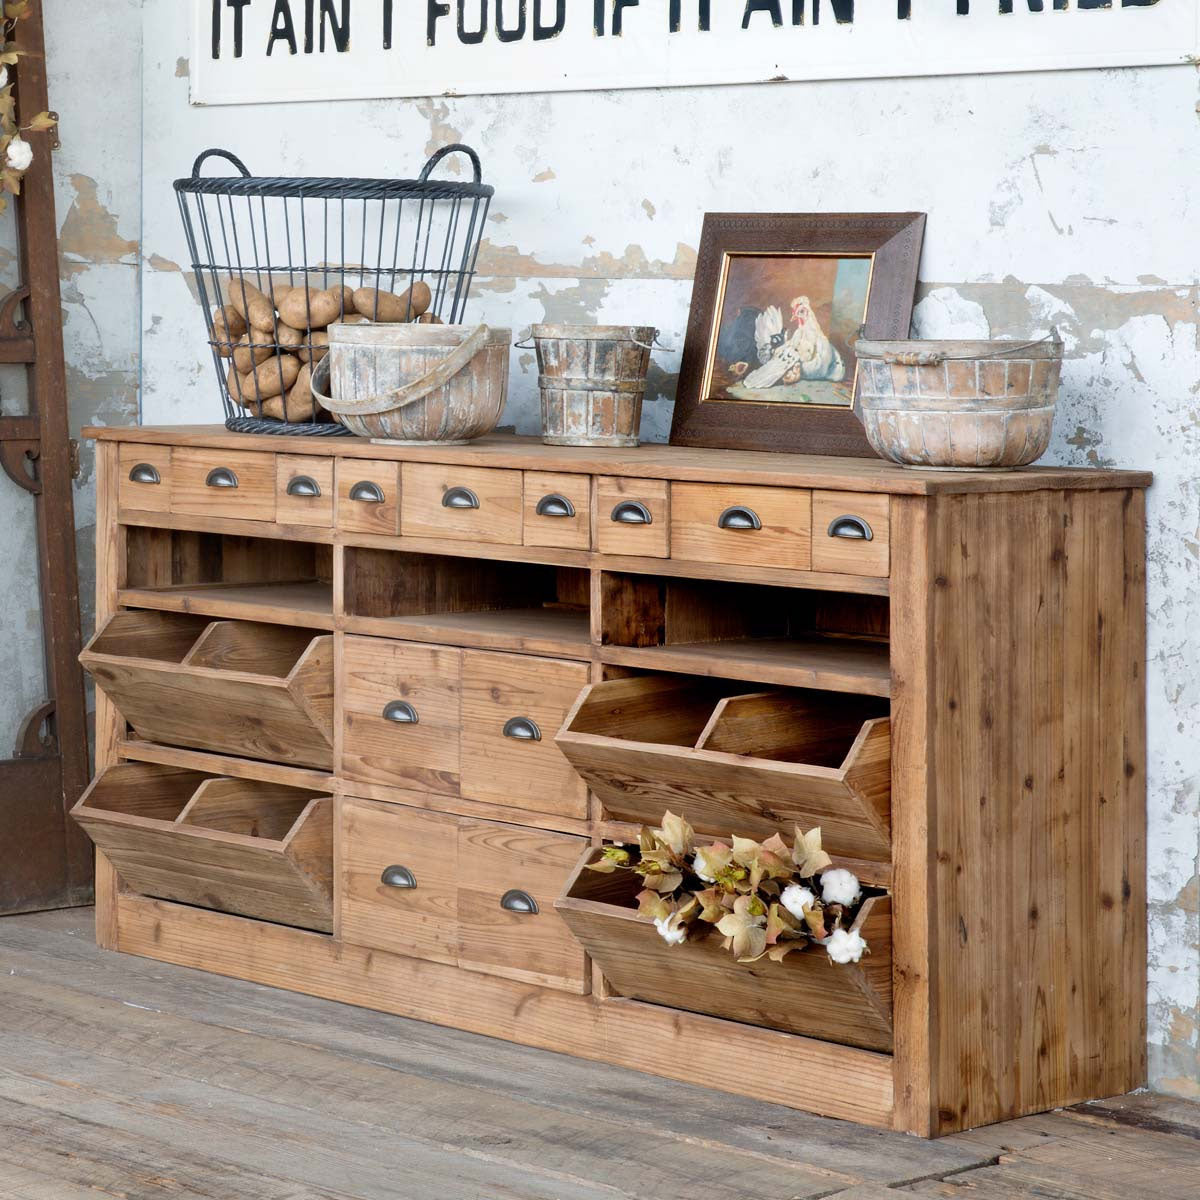 Reclaimed Wood Pantry Counter